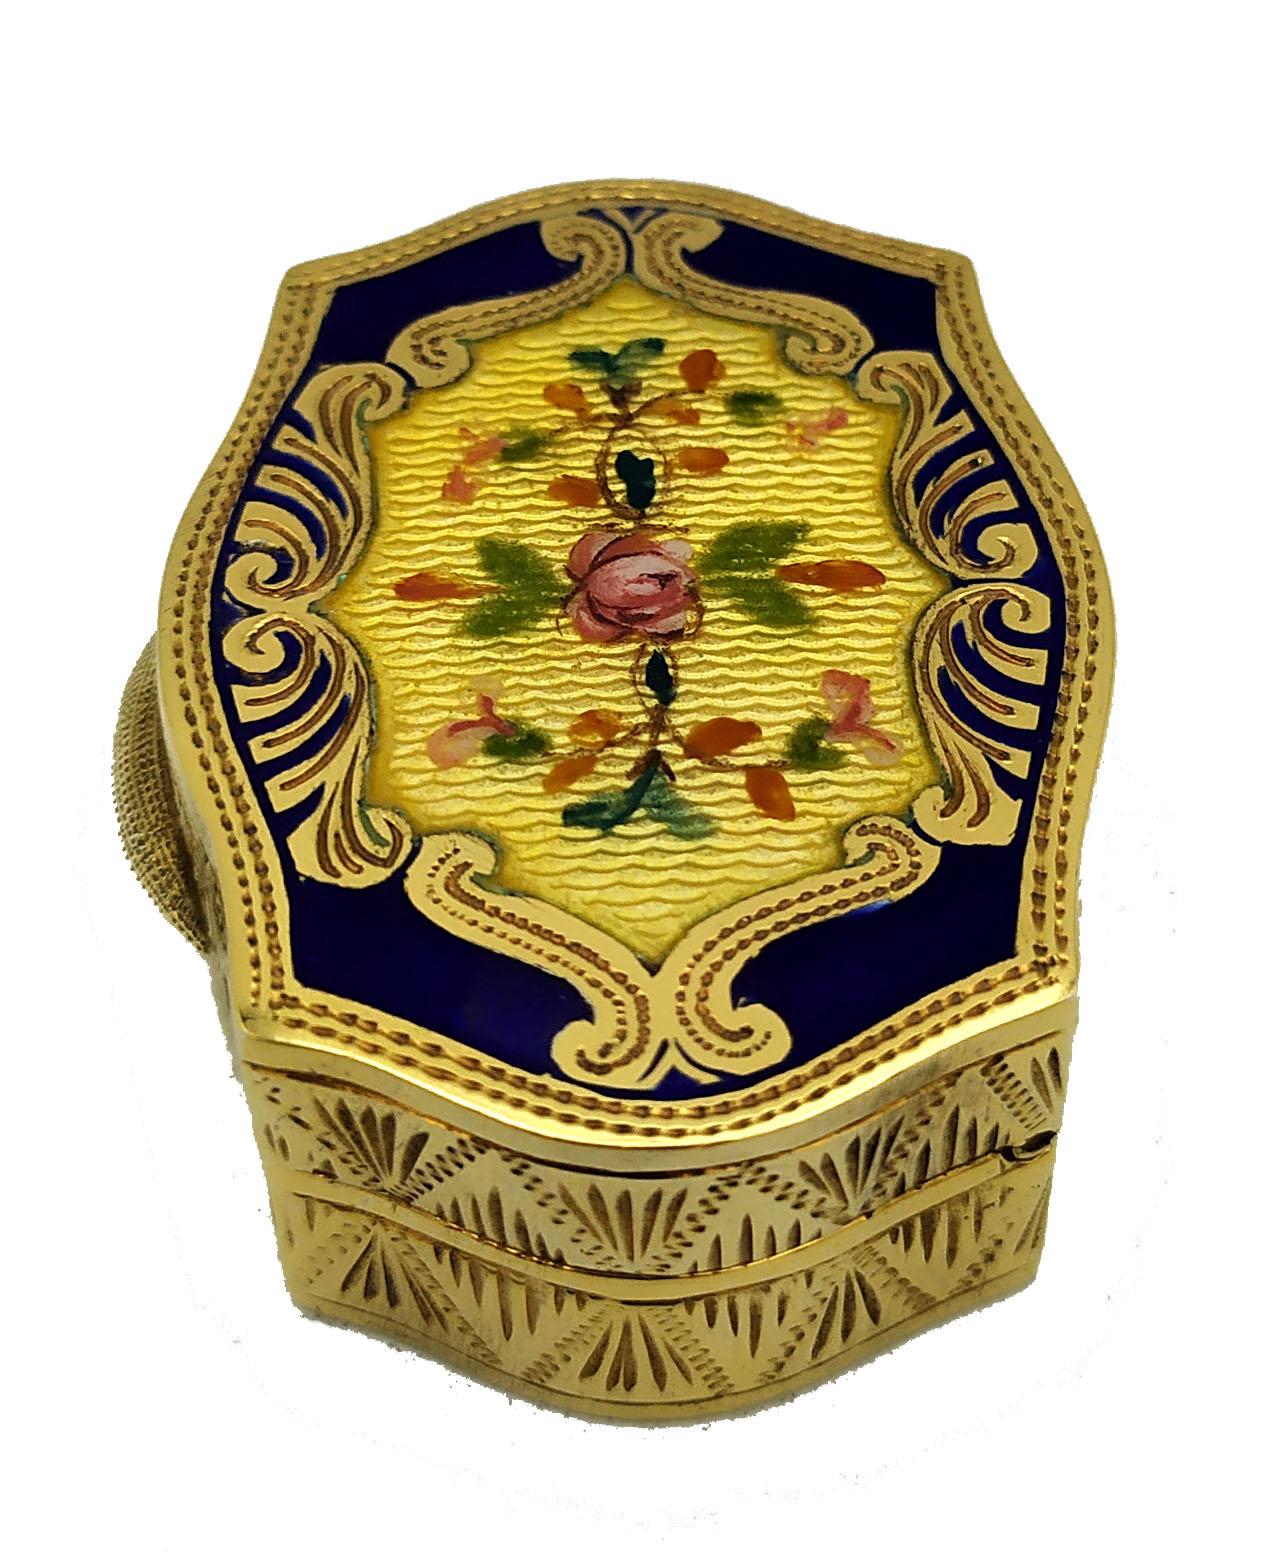 Pill Box Silver is in 925/1000 sterling silver gold plated 24carats.
Pill Box Silver is with translucent fired enamels on guilloché.
Pill Box Silver has a hand-painted floral miniature, with fine hand engravings.
Pill Box Silver Sterling is in